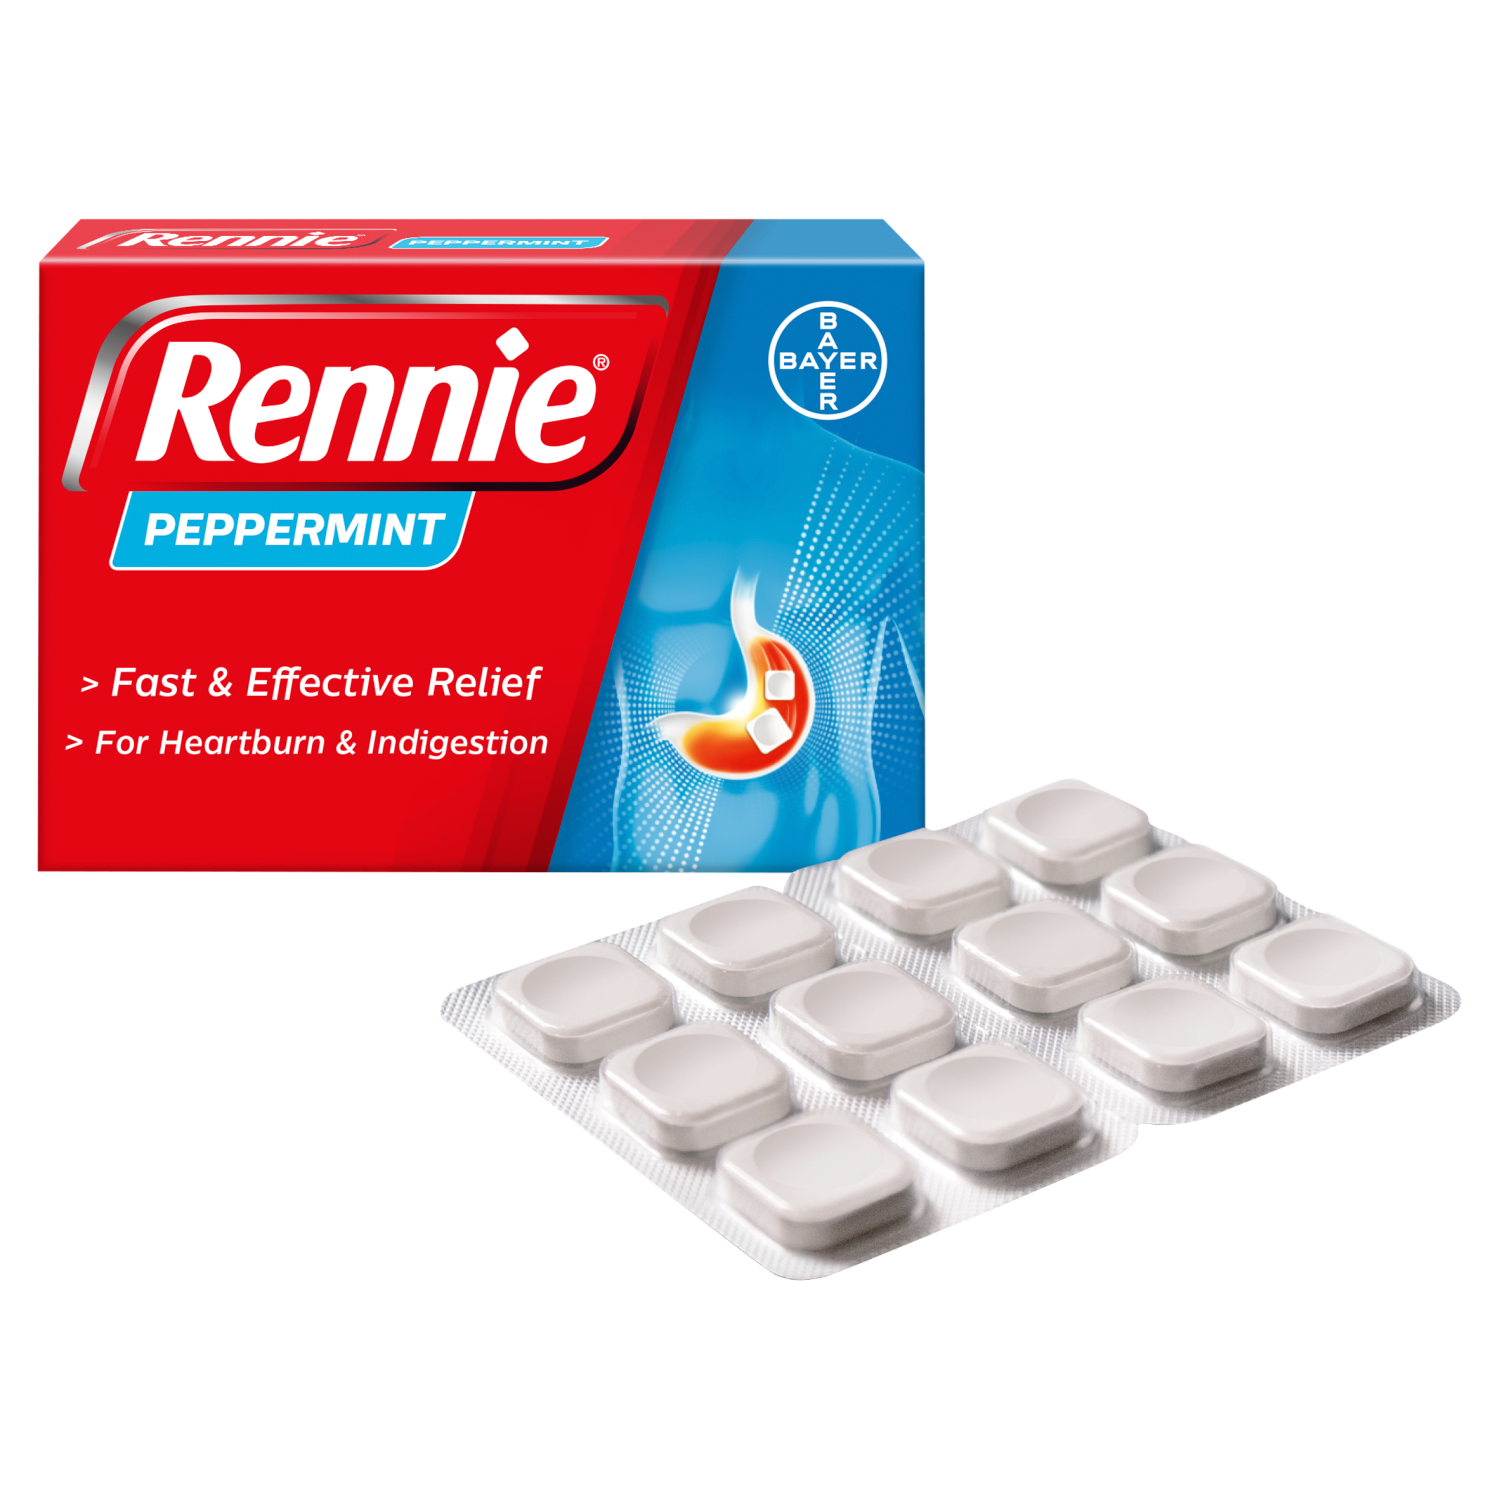 Rennie Peppermint 72 Chewable Tablets